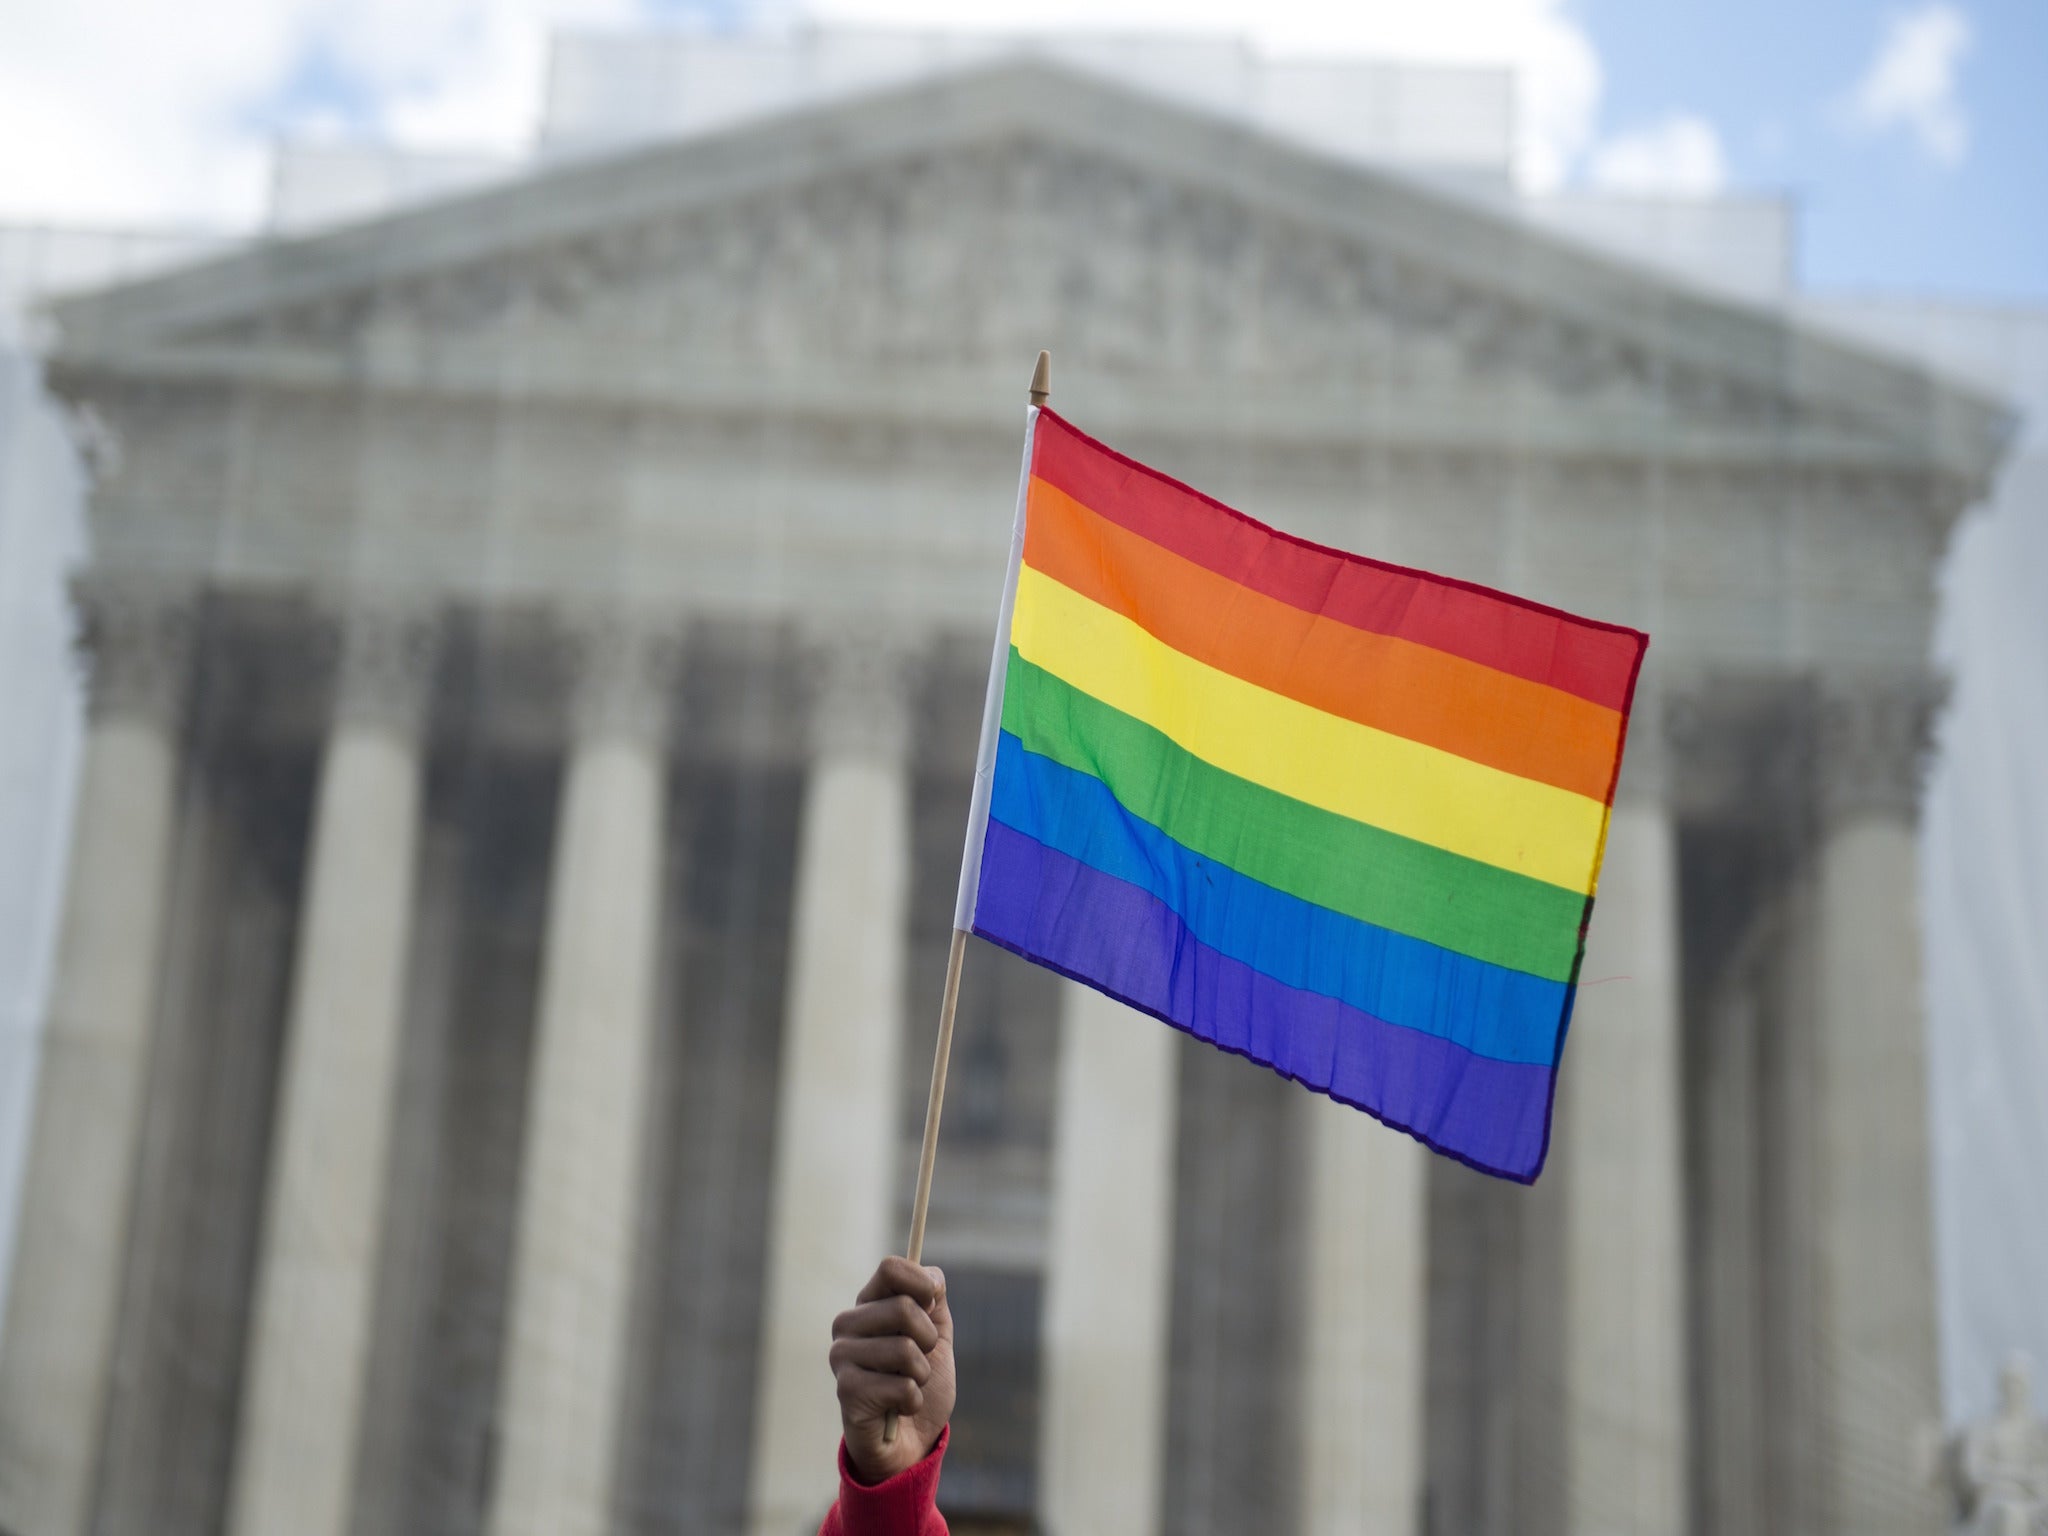 The woman asked a judge to rule homosexuality was a sin